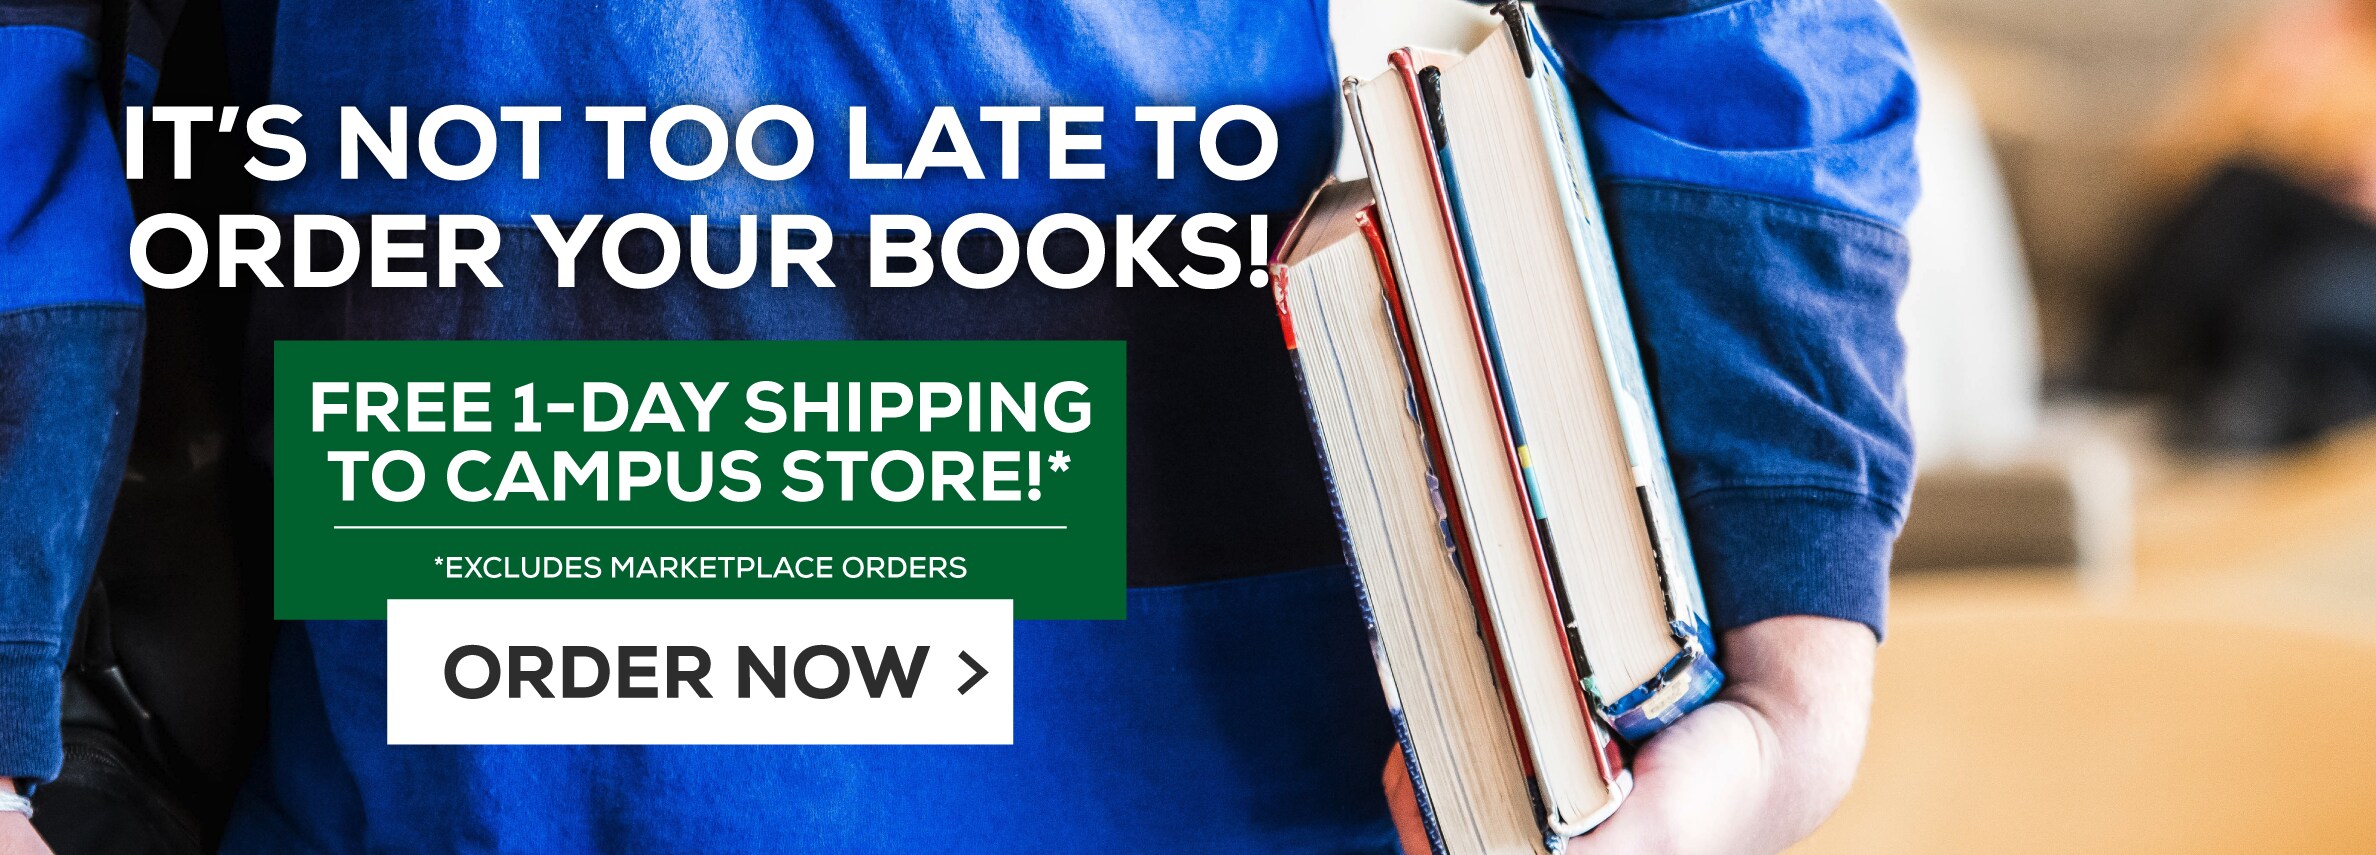 It's not too late to order your books! Free 1-Day Shipping to Campus Store!* Excludes marketplace purchases. Order Now.